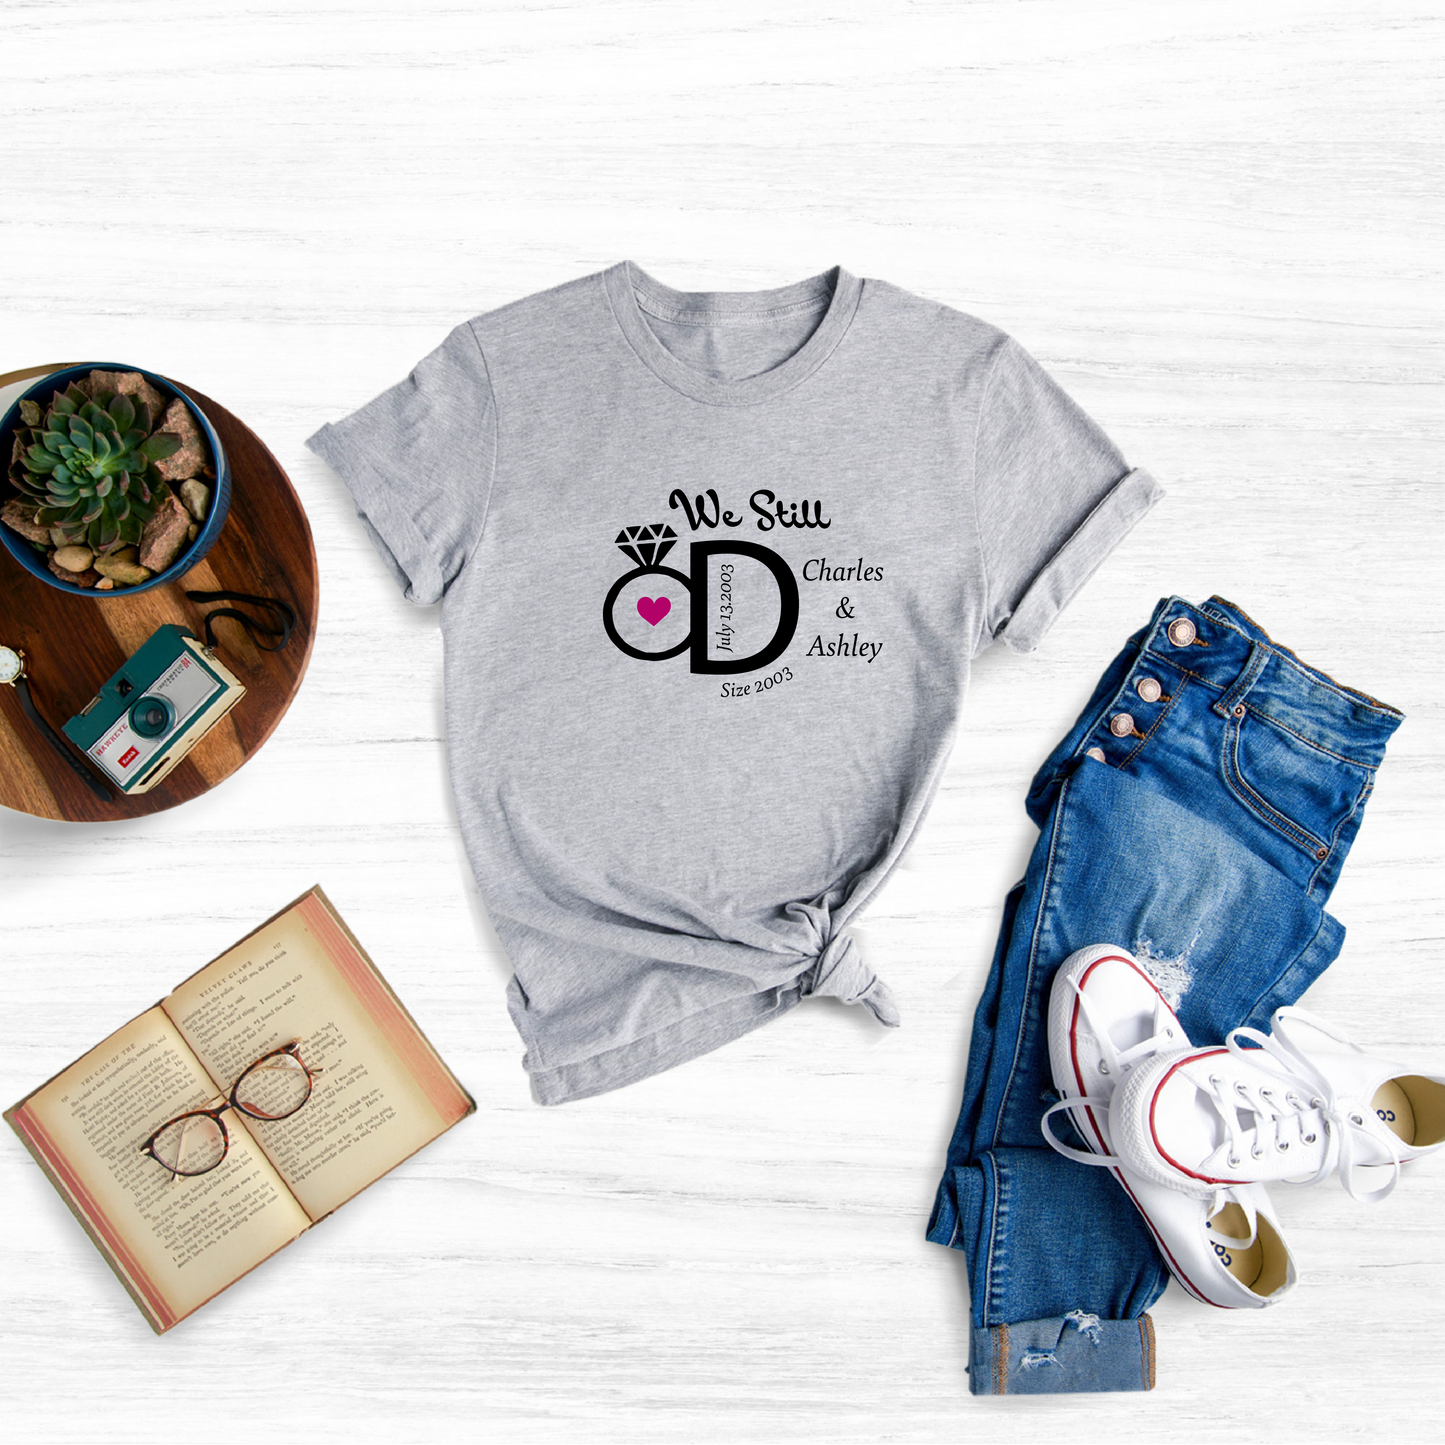 Mark your special milestone with these adorable and personalized Wedding Anniversary tees